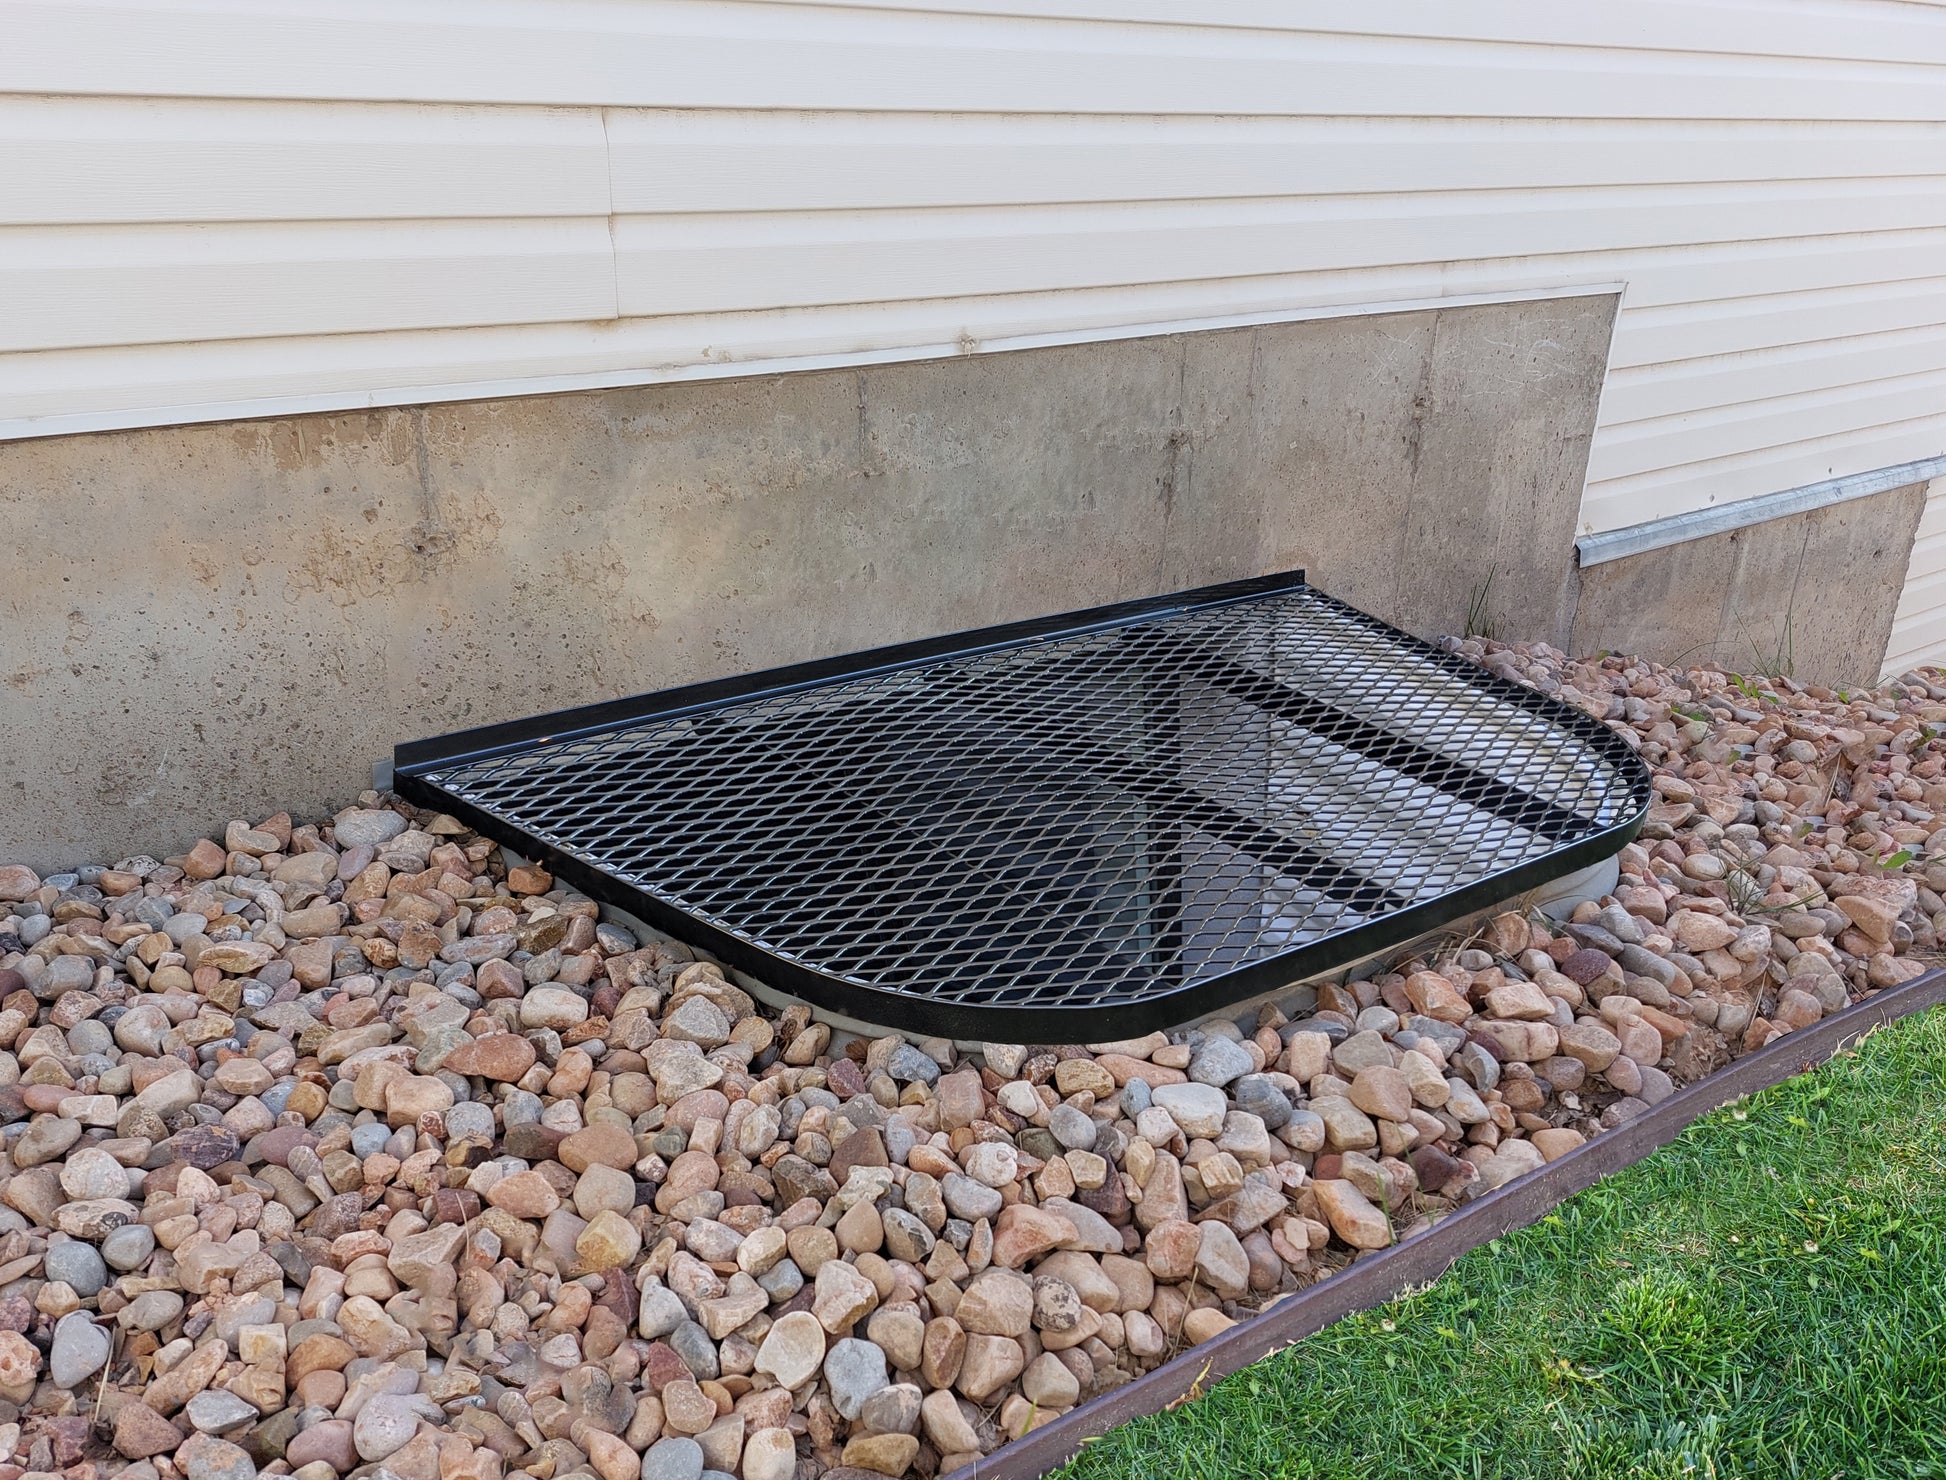 Affordable Steel Mesh Window Well Cover in Utah – SafeWell Window Well  Covers